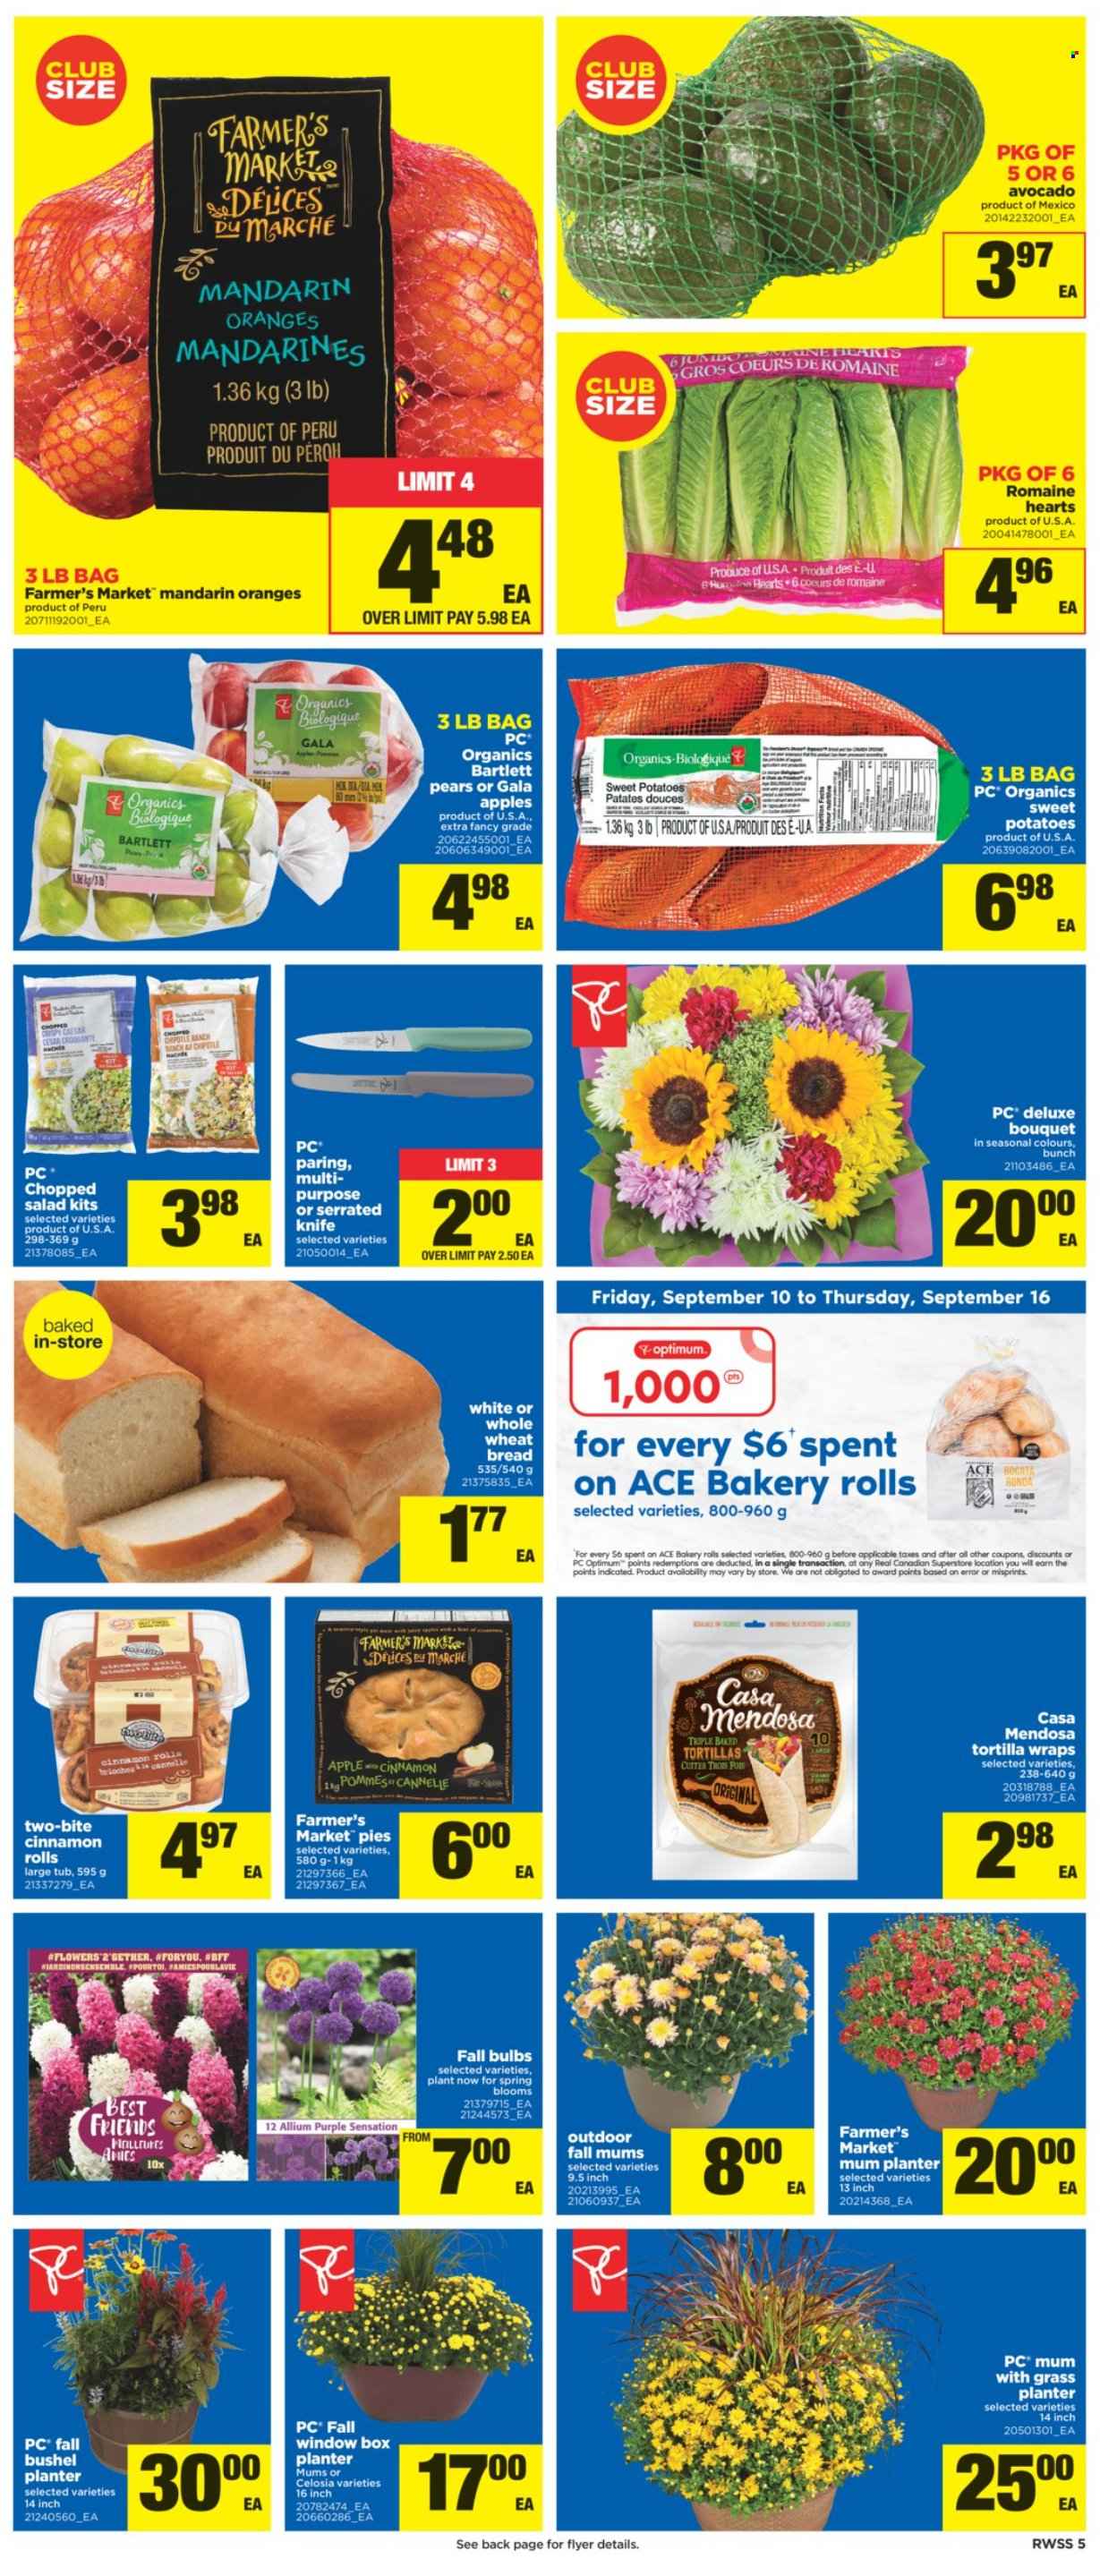 thumbnail - Real Canadian Superstore Flyer - September 10, 2021 - September 16, 2021 - Sales products - tortillas, wheat bread, ACE Bakery, wraps, cinnamon roll, sweet potato, potatoes, salad, chopped salad, apples, avocado, Bartlett pears, Gala, mandarines, pears, Mum, knife, bulb, Optimum, bouquet, oranges. Page 5.